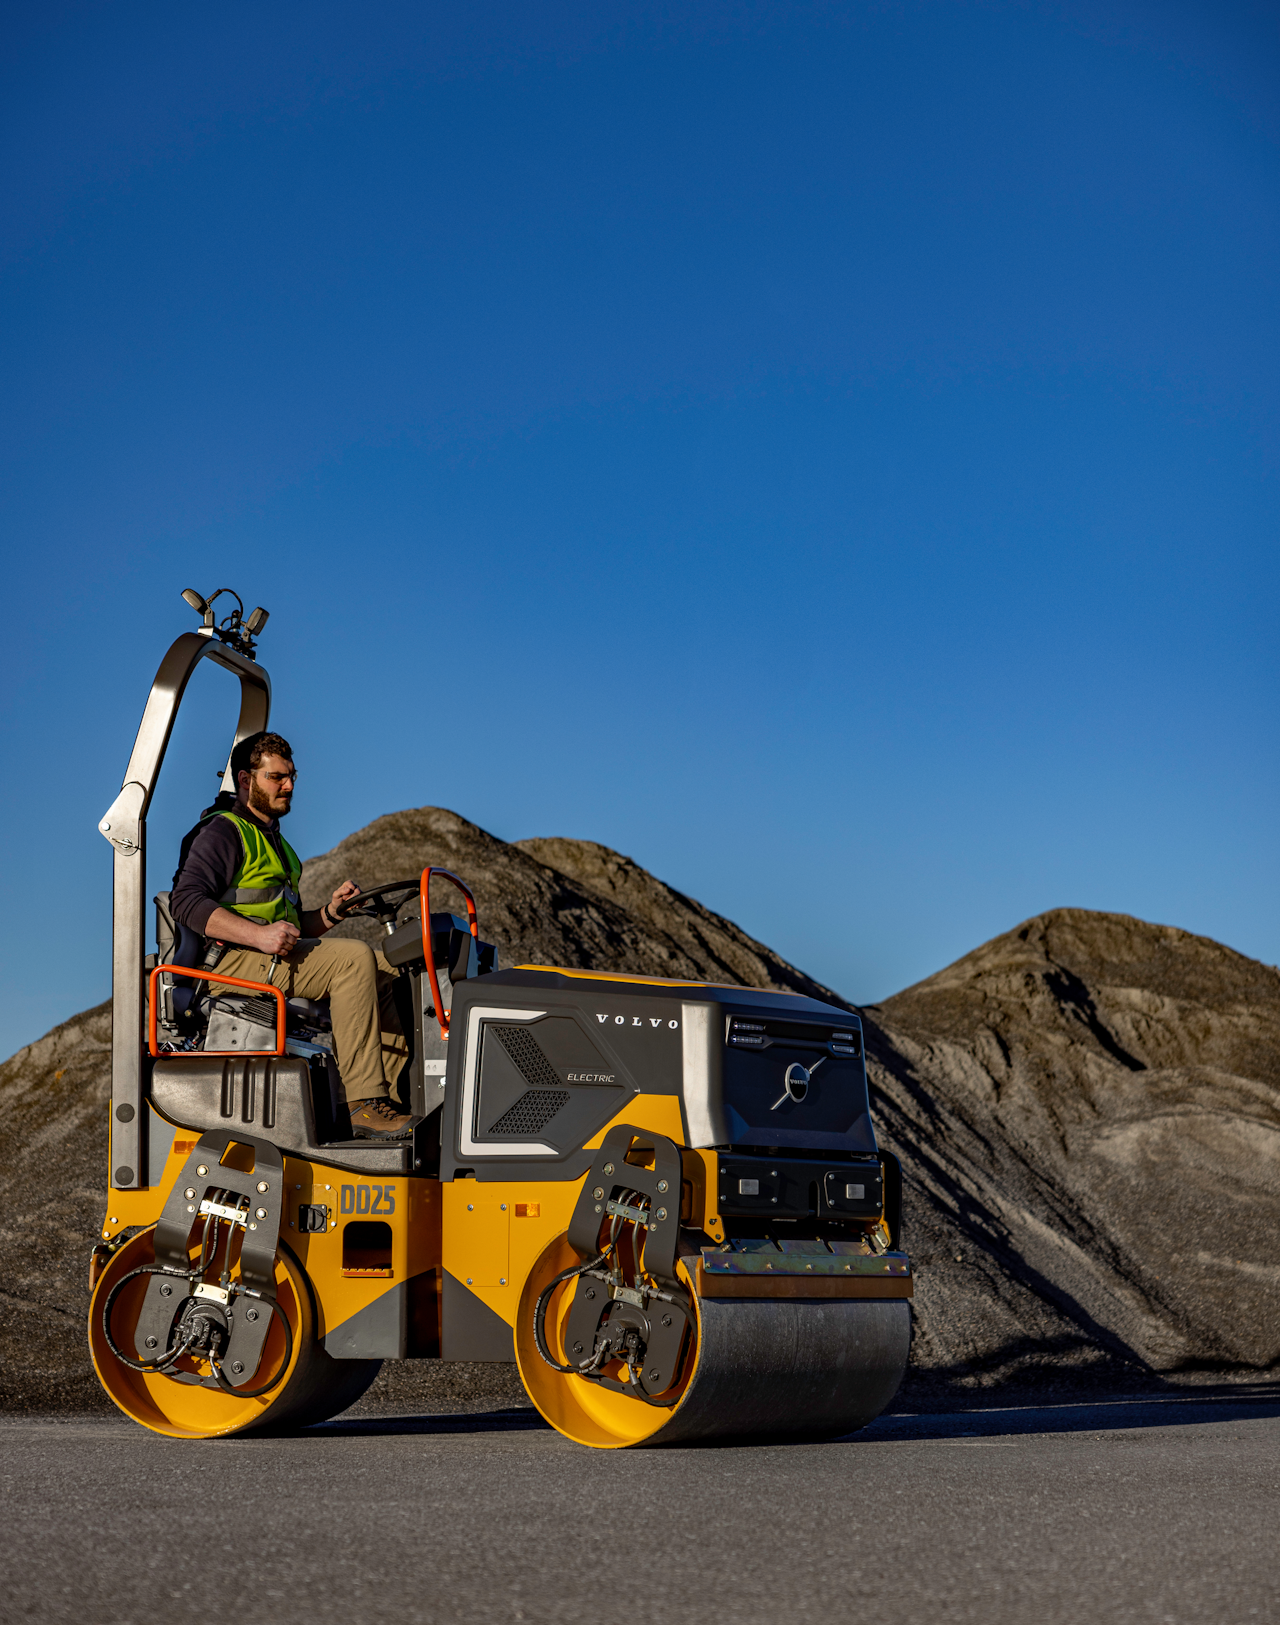 Volvo DD25 Electric Asphalt Compactor From: Volvo Construction 